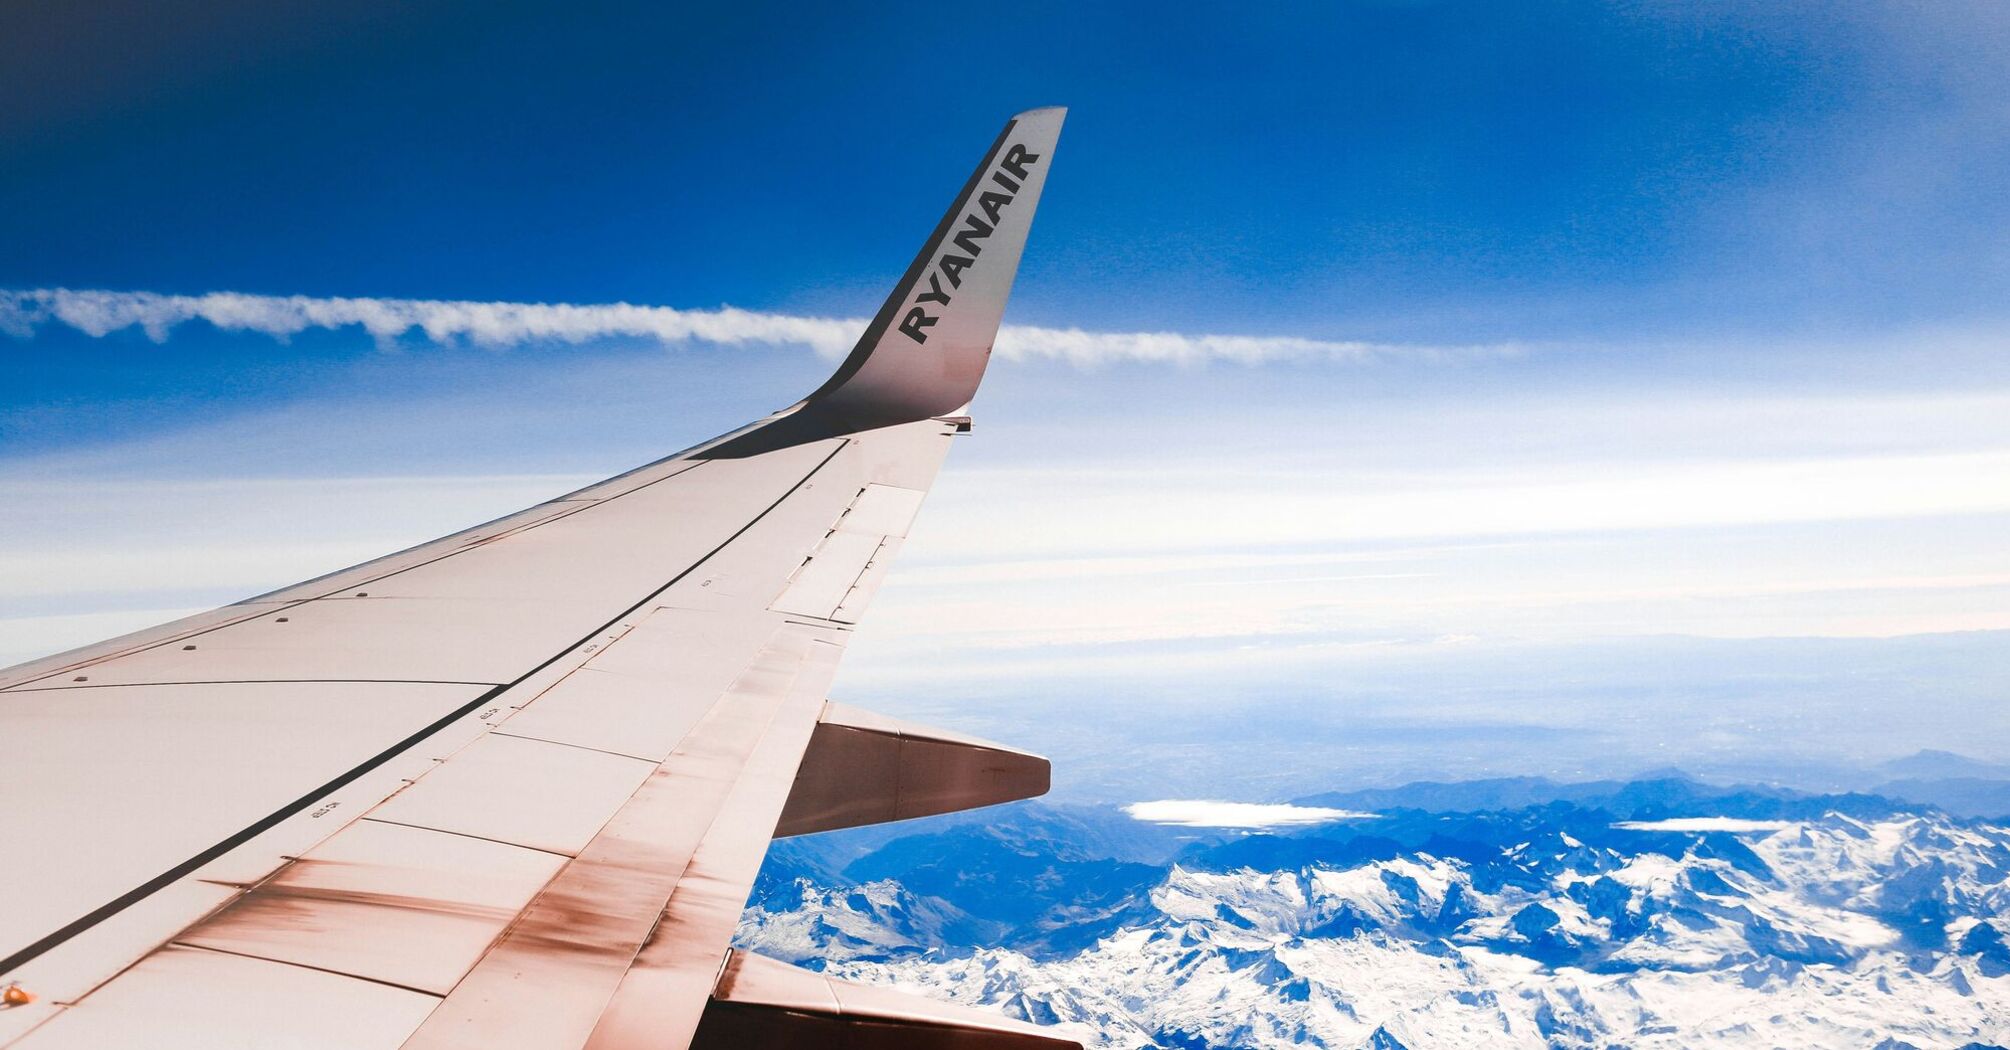 The wingtip of an Ryanair airplane against a clear blue sky